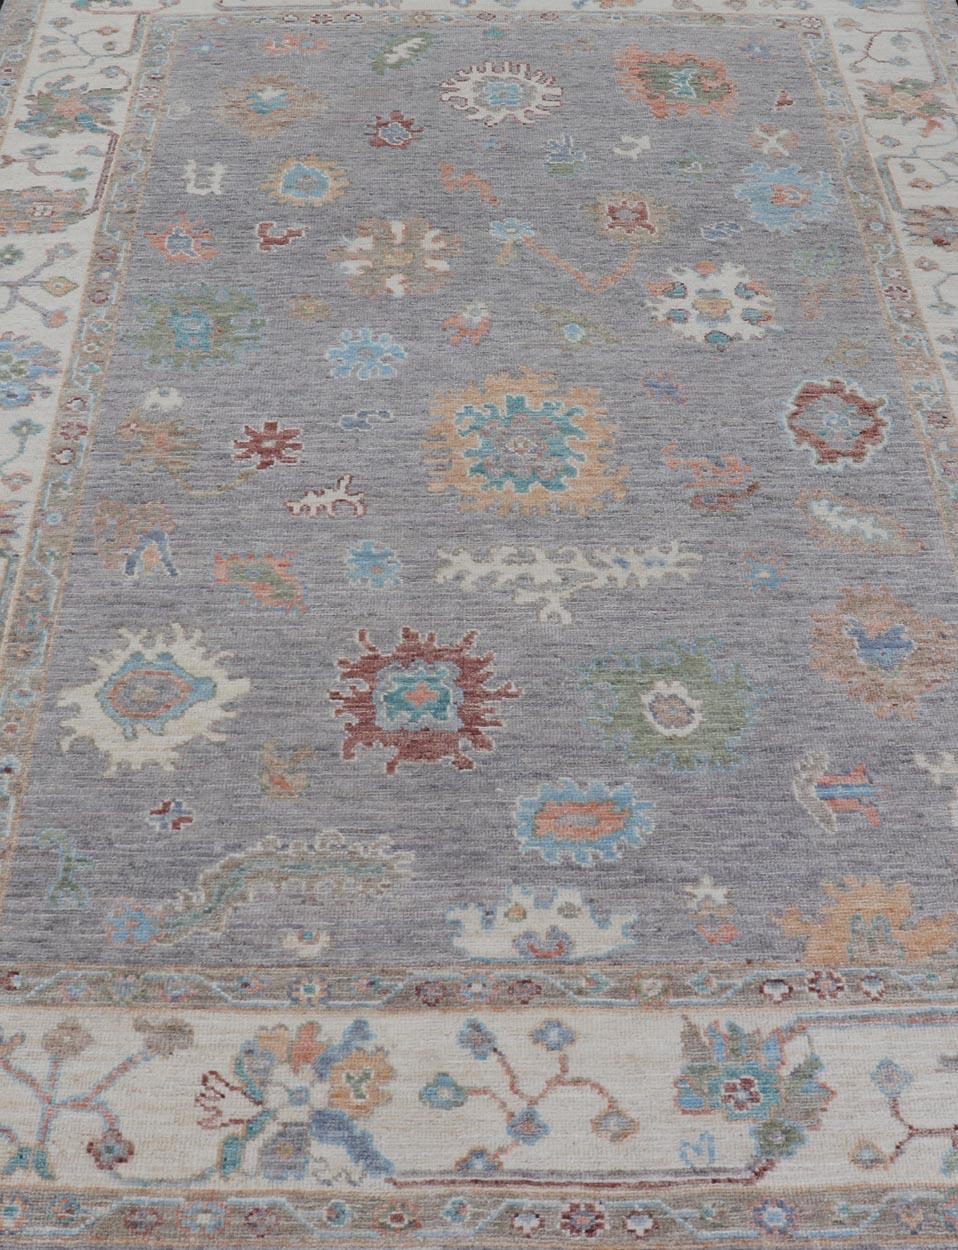 This modern casual floral Oushak designed rug has been hand-knotted in wool. The rug features a modern sub-geometric floral design which is enclosed within a complementary border. The rug is rendered in gray, cream and multi colors, making this rug